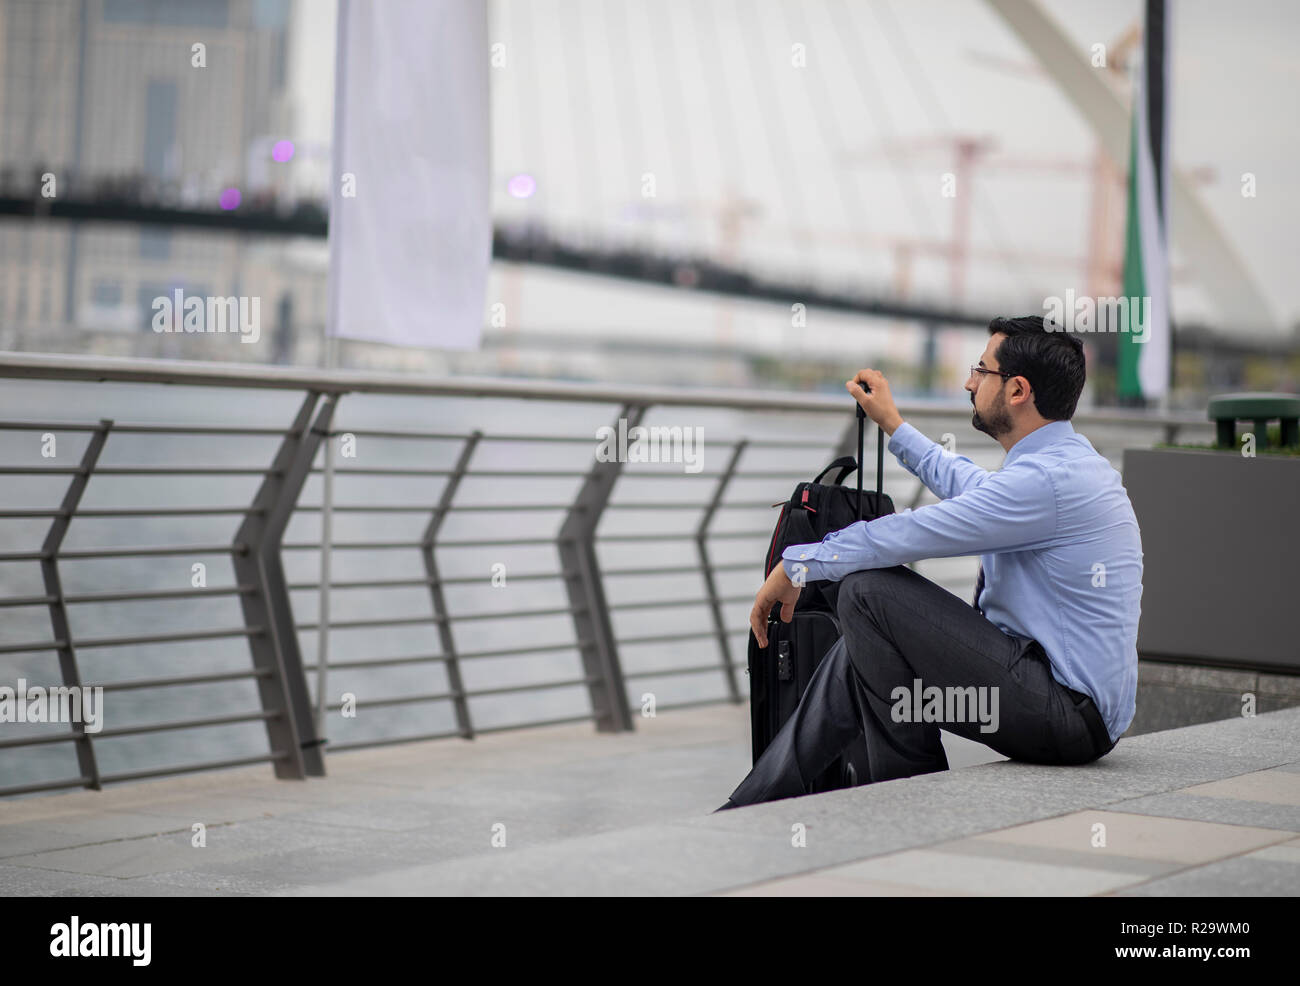 arab businessman with his suitcase in a city, resting on stairs Stock Photo